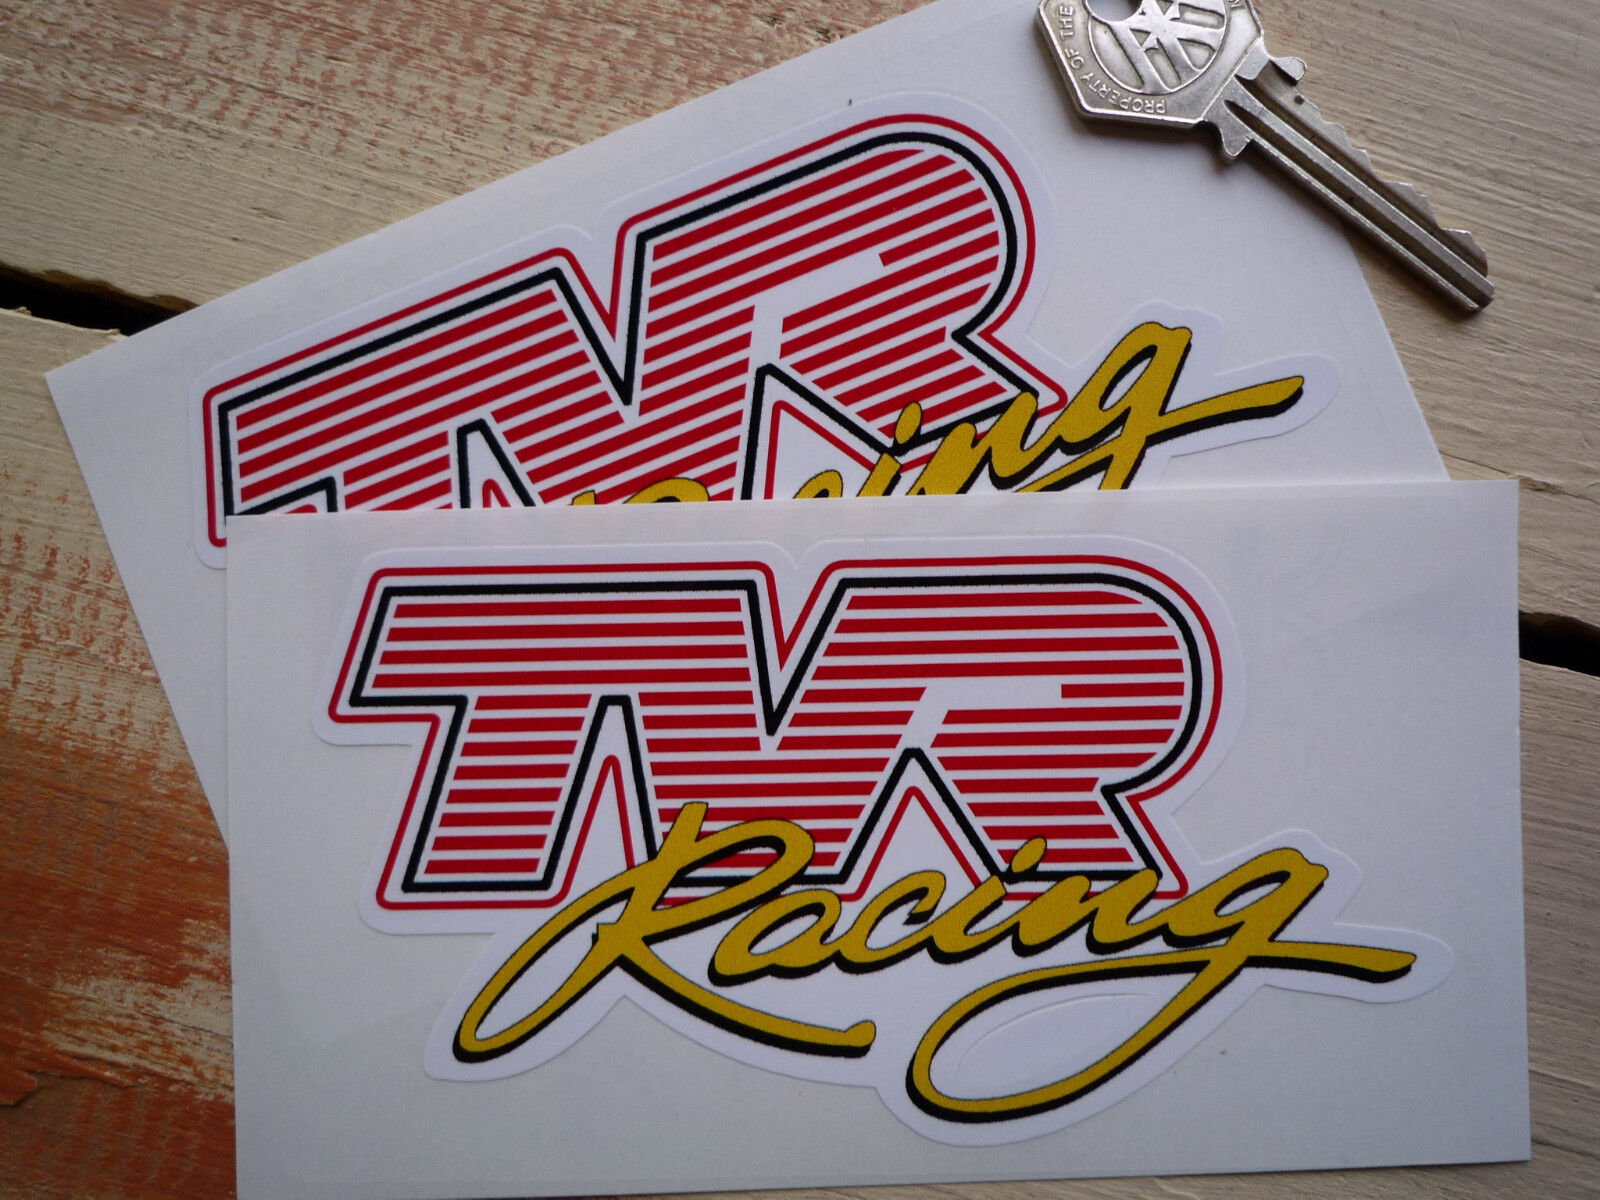 TVR RACING STYLE STICKERS Griffith Cerbera Tuscan etc.